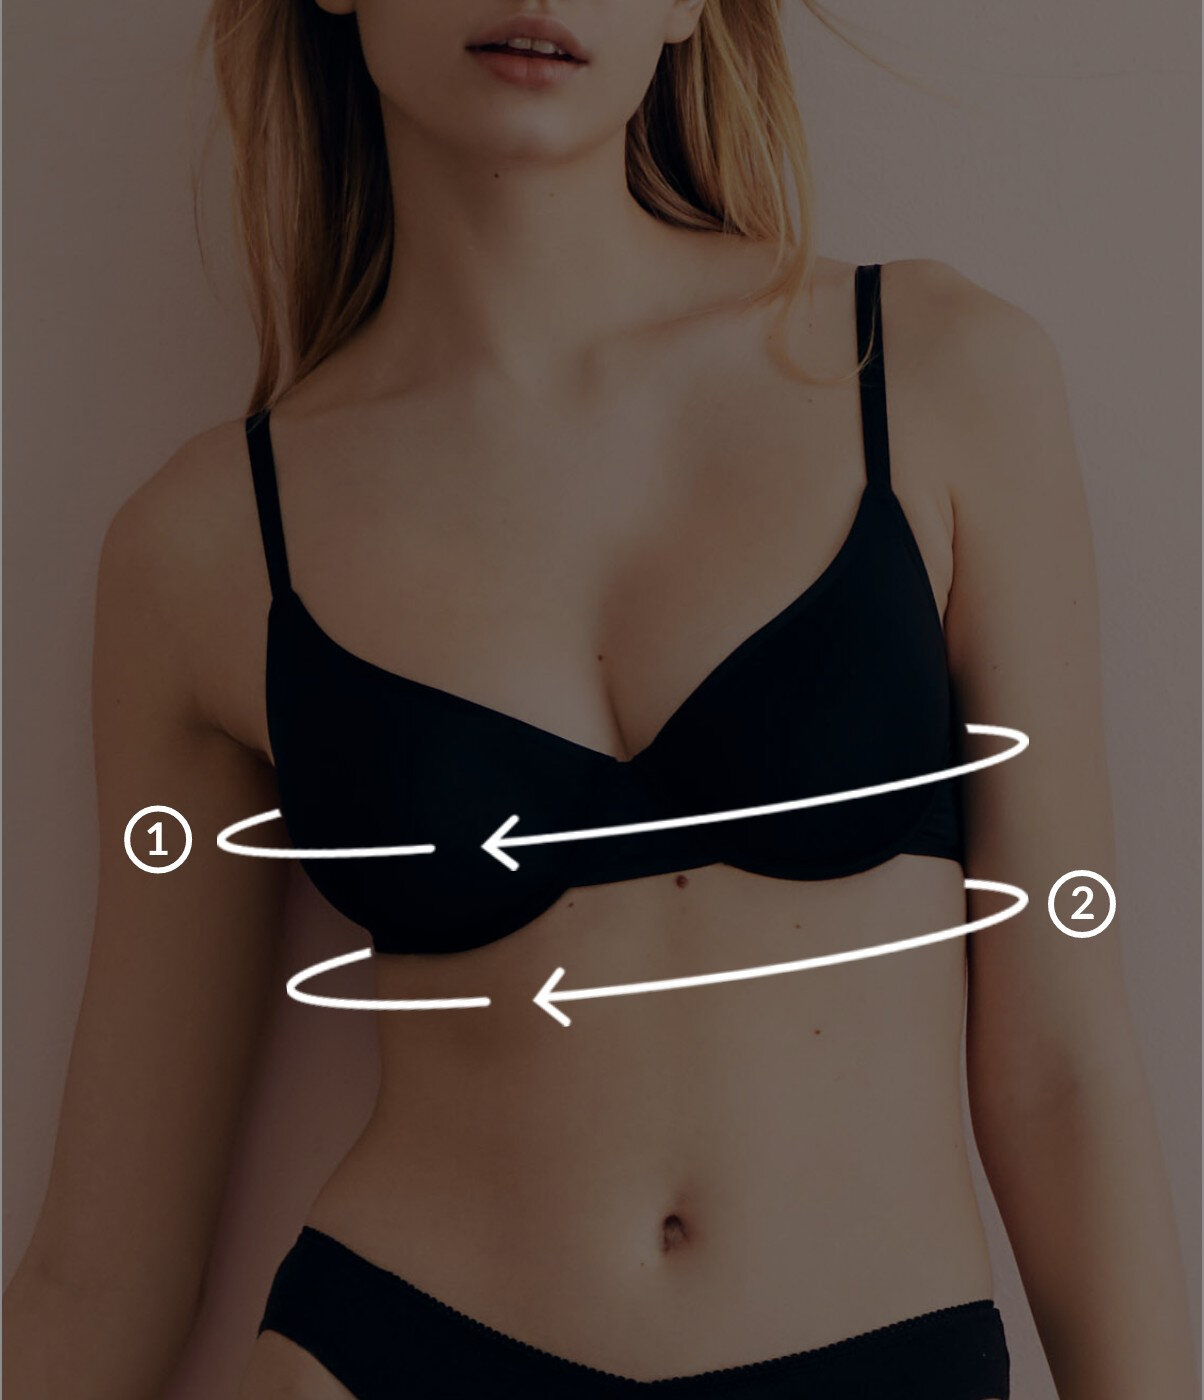 How to Make a Bra Strapless - 4 Methods from Simple to In Depth 